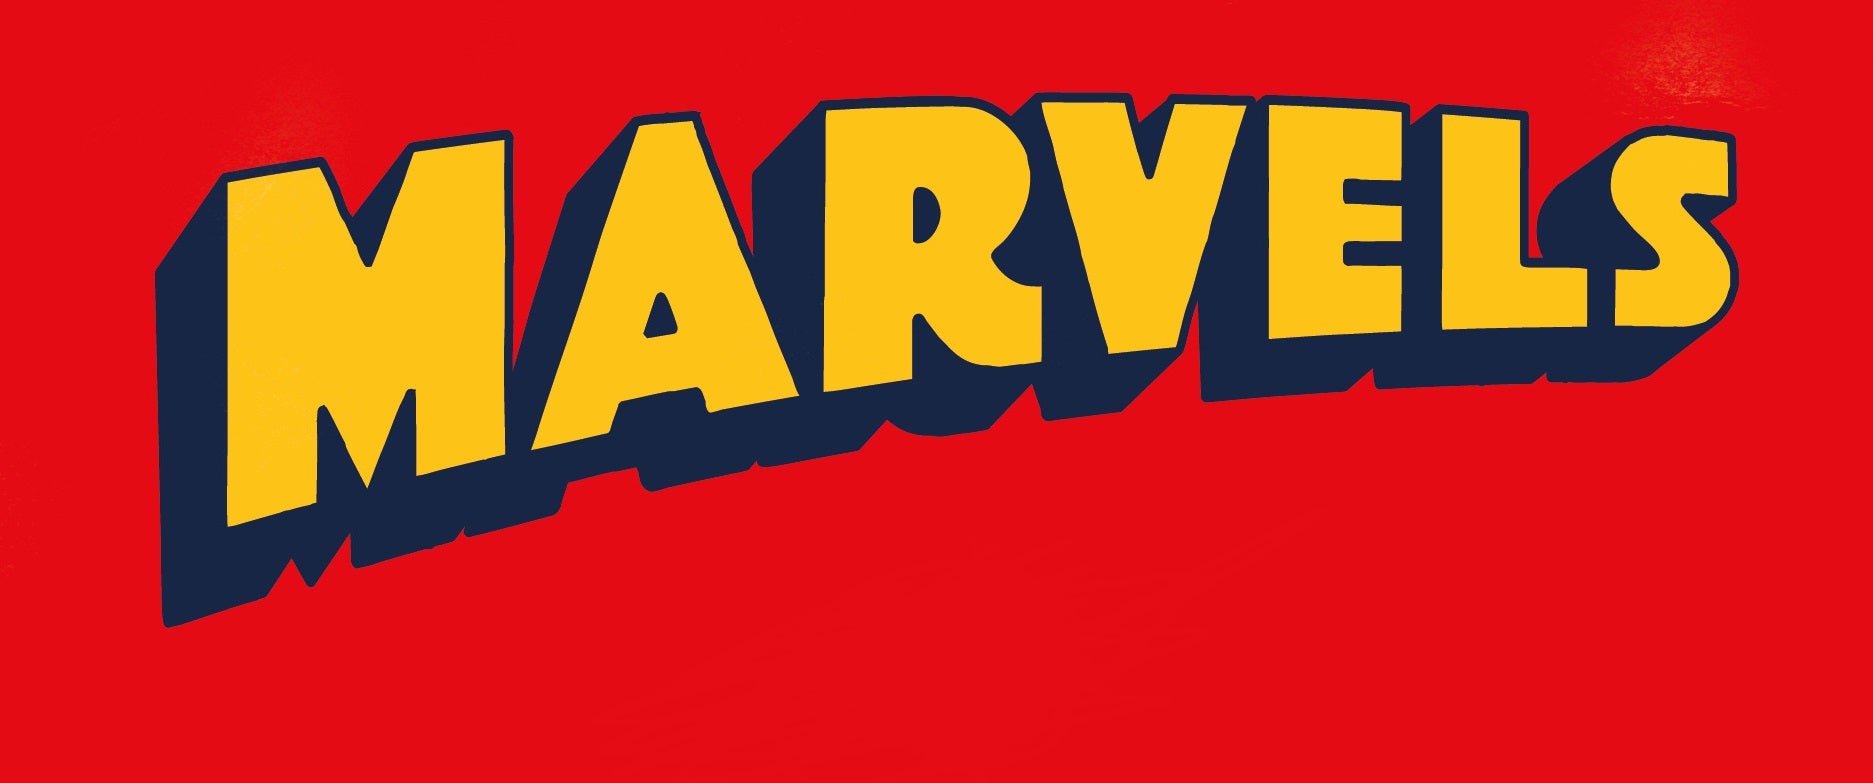 Discover All of the Marvels!